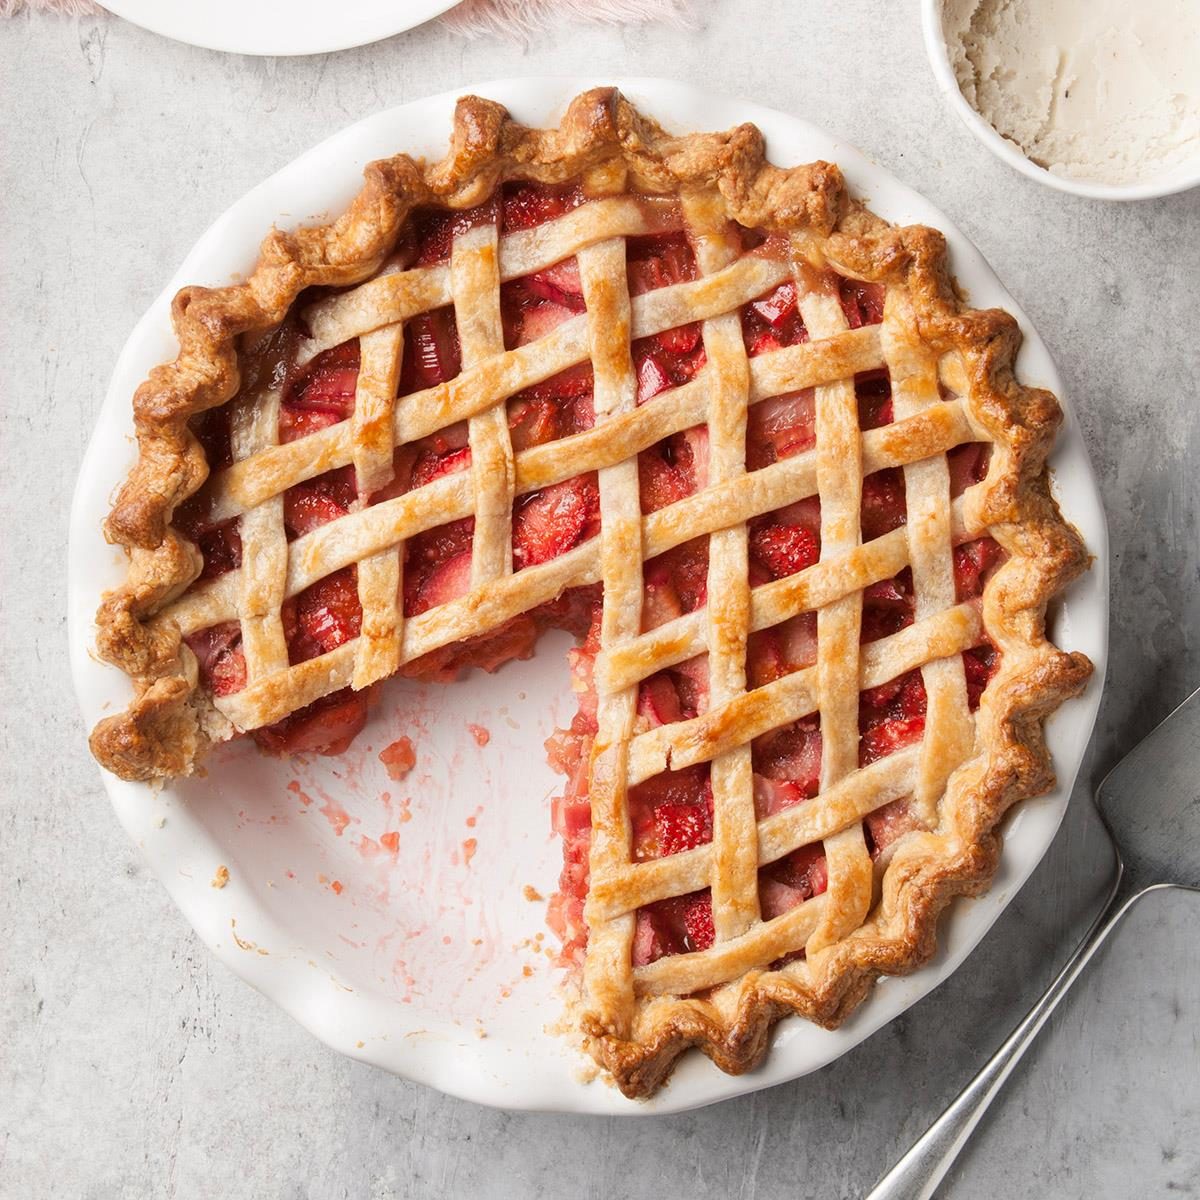 50 of Our Best Pie Recipes of All Time [Classics + New Recipes]